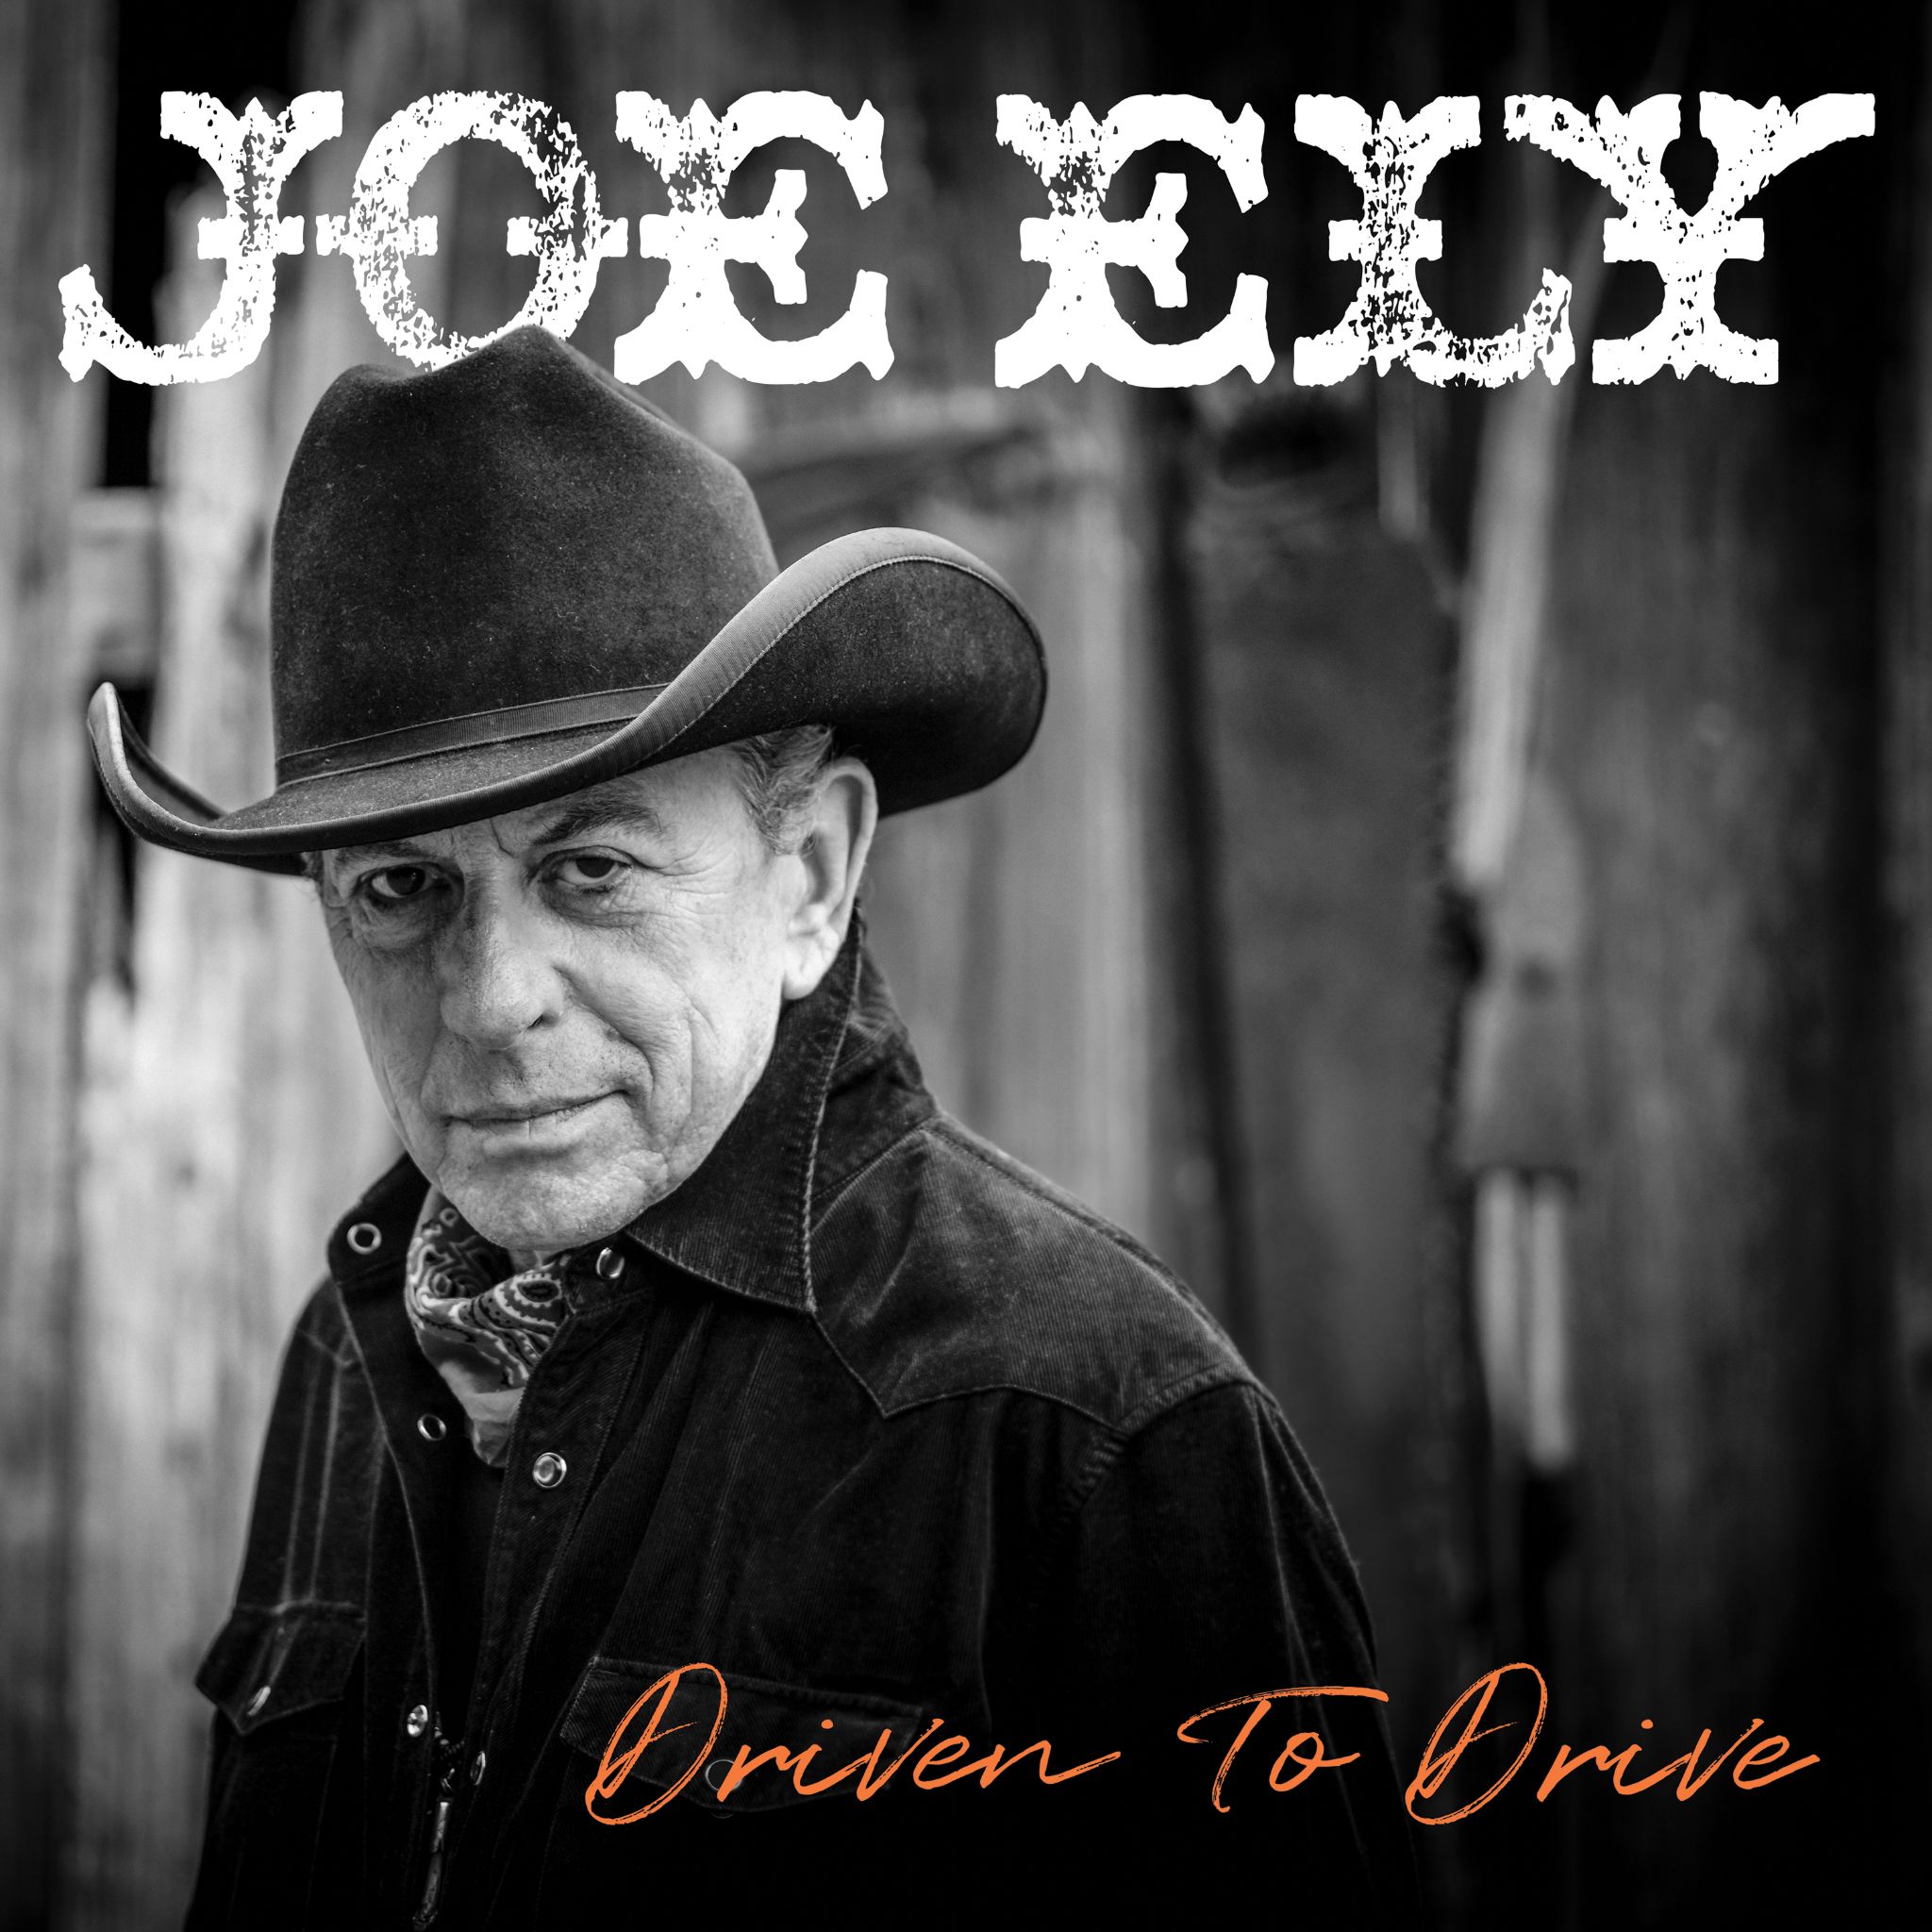 Joe Ely Announces New Album Driven to Drive Out August 2